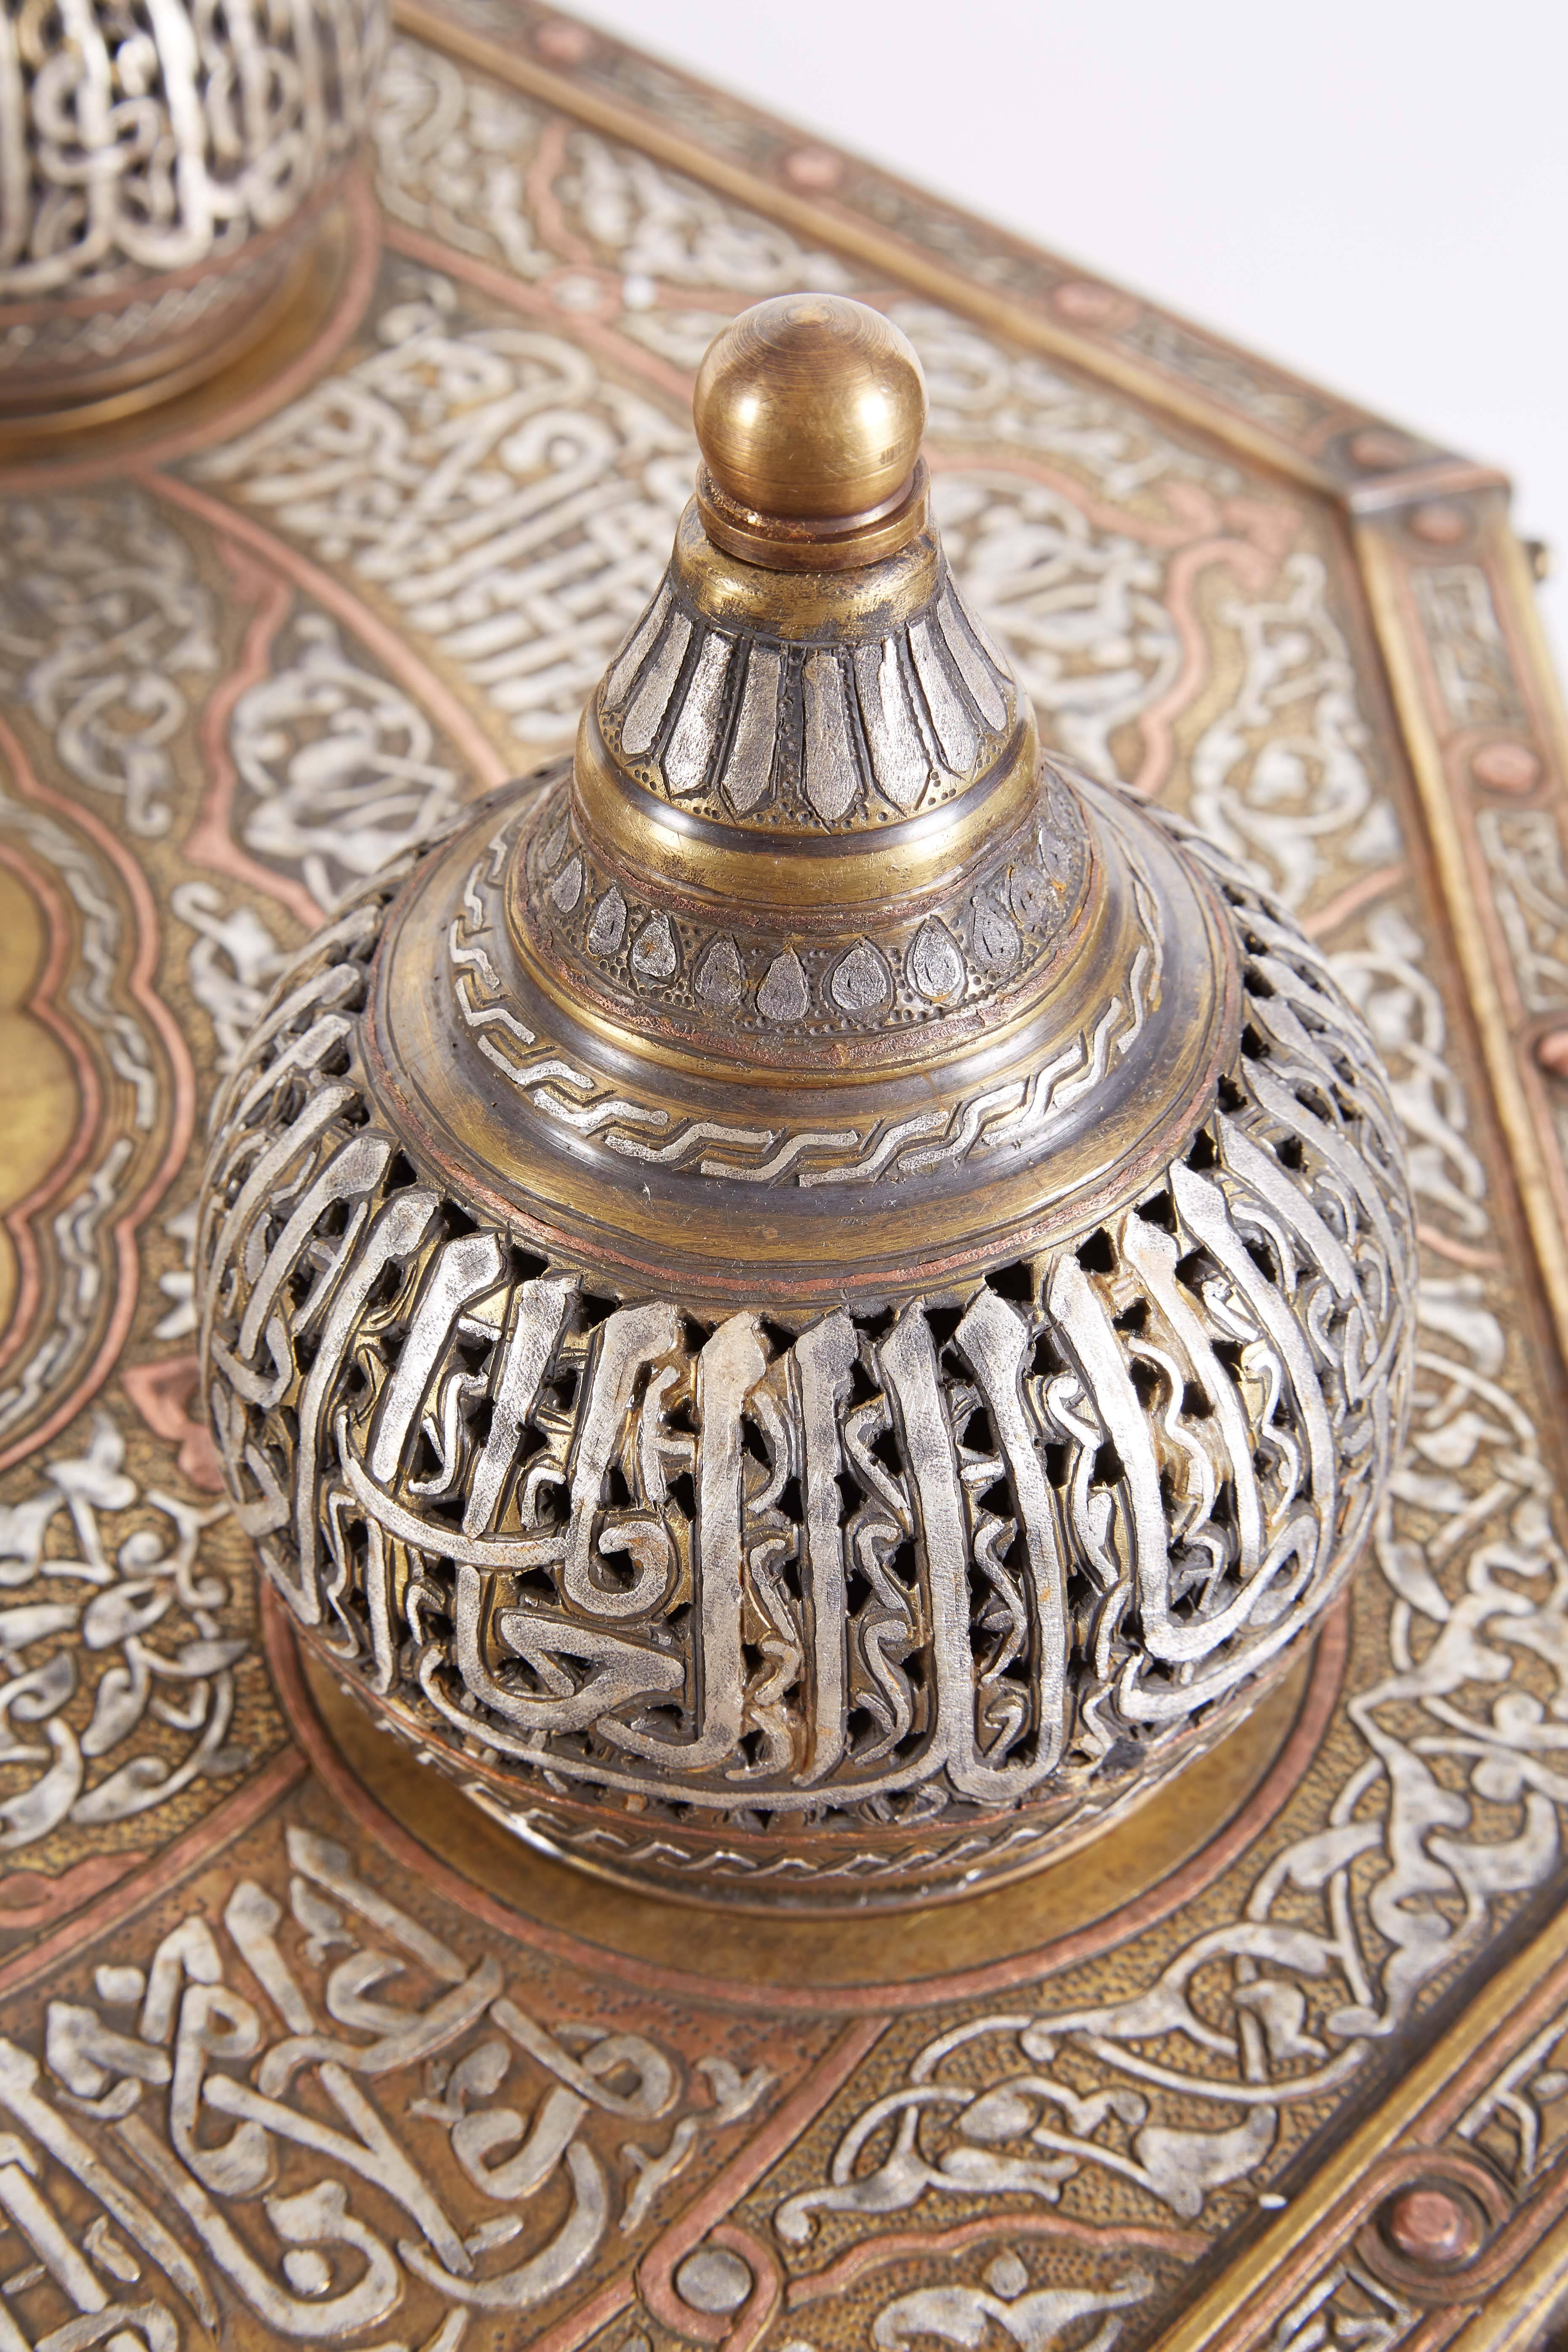 Brass Large Islamic Silver Inlaid Domed Incense Burner with Arabic Calligraphy Moorish